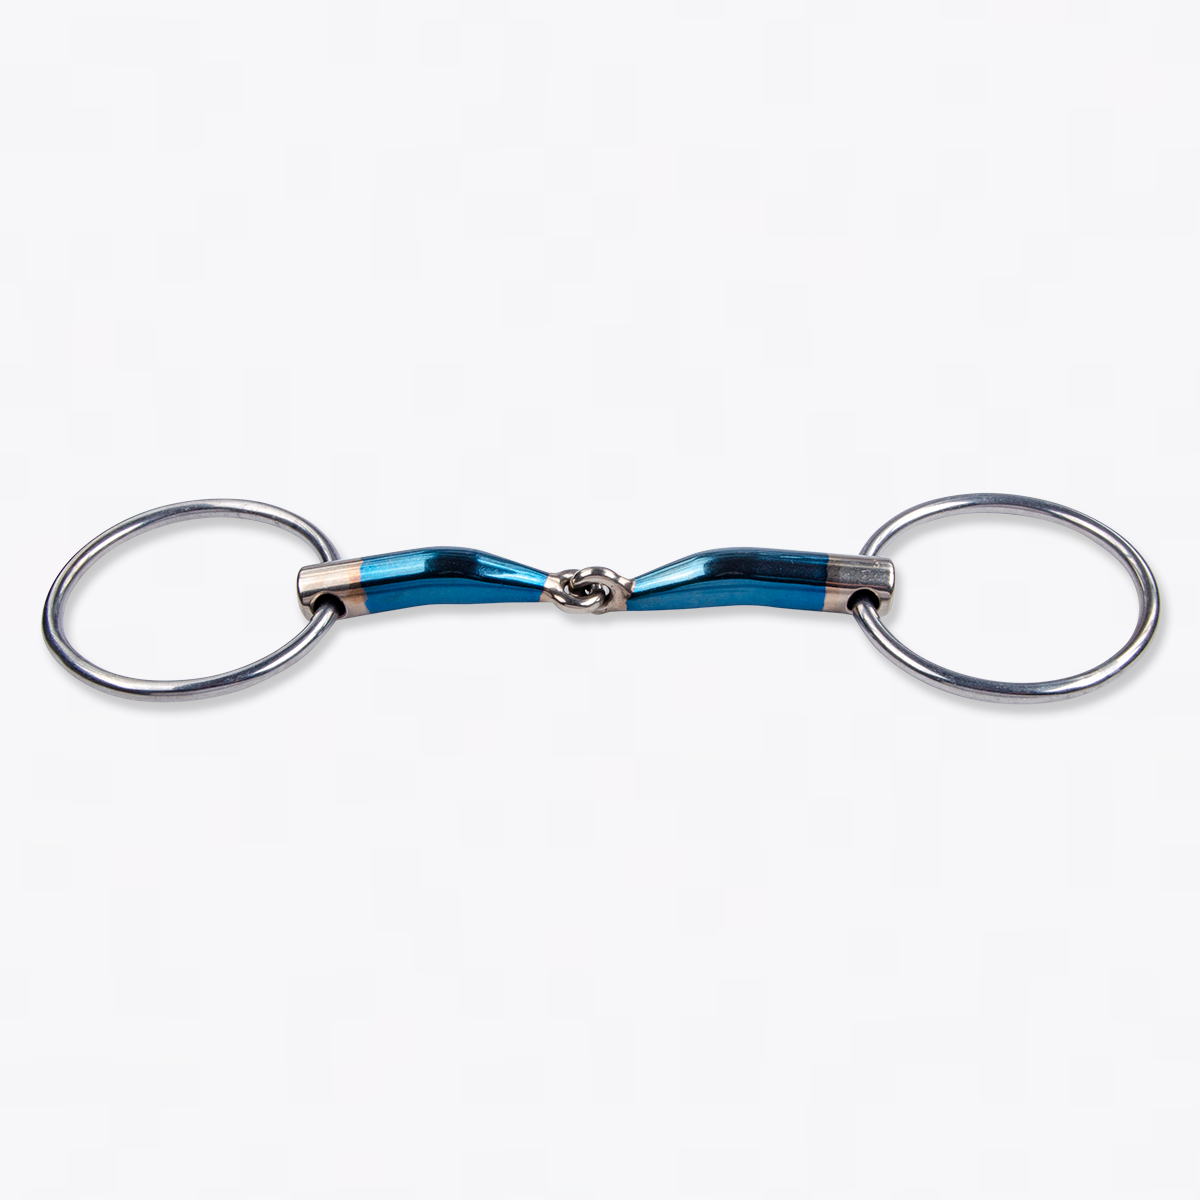 TRUST BITS SINGLE JOINTED SNAFFLE 16MM